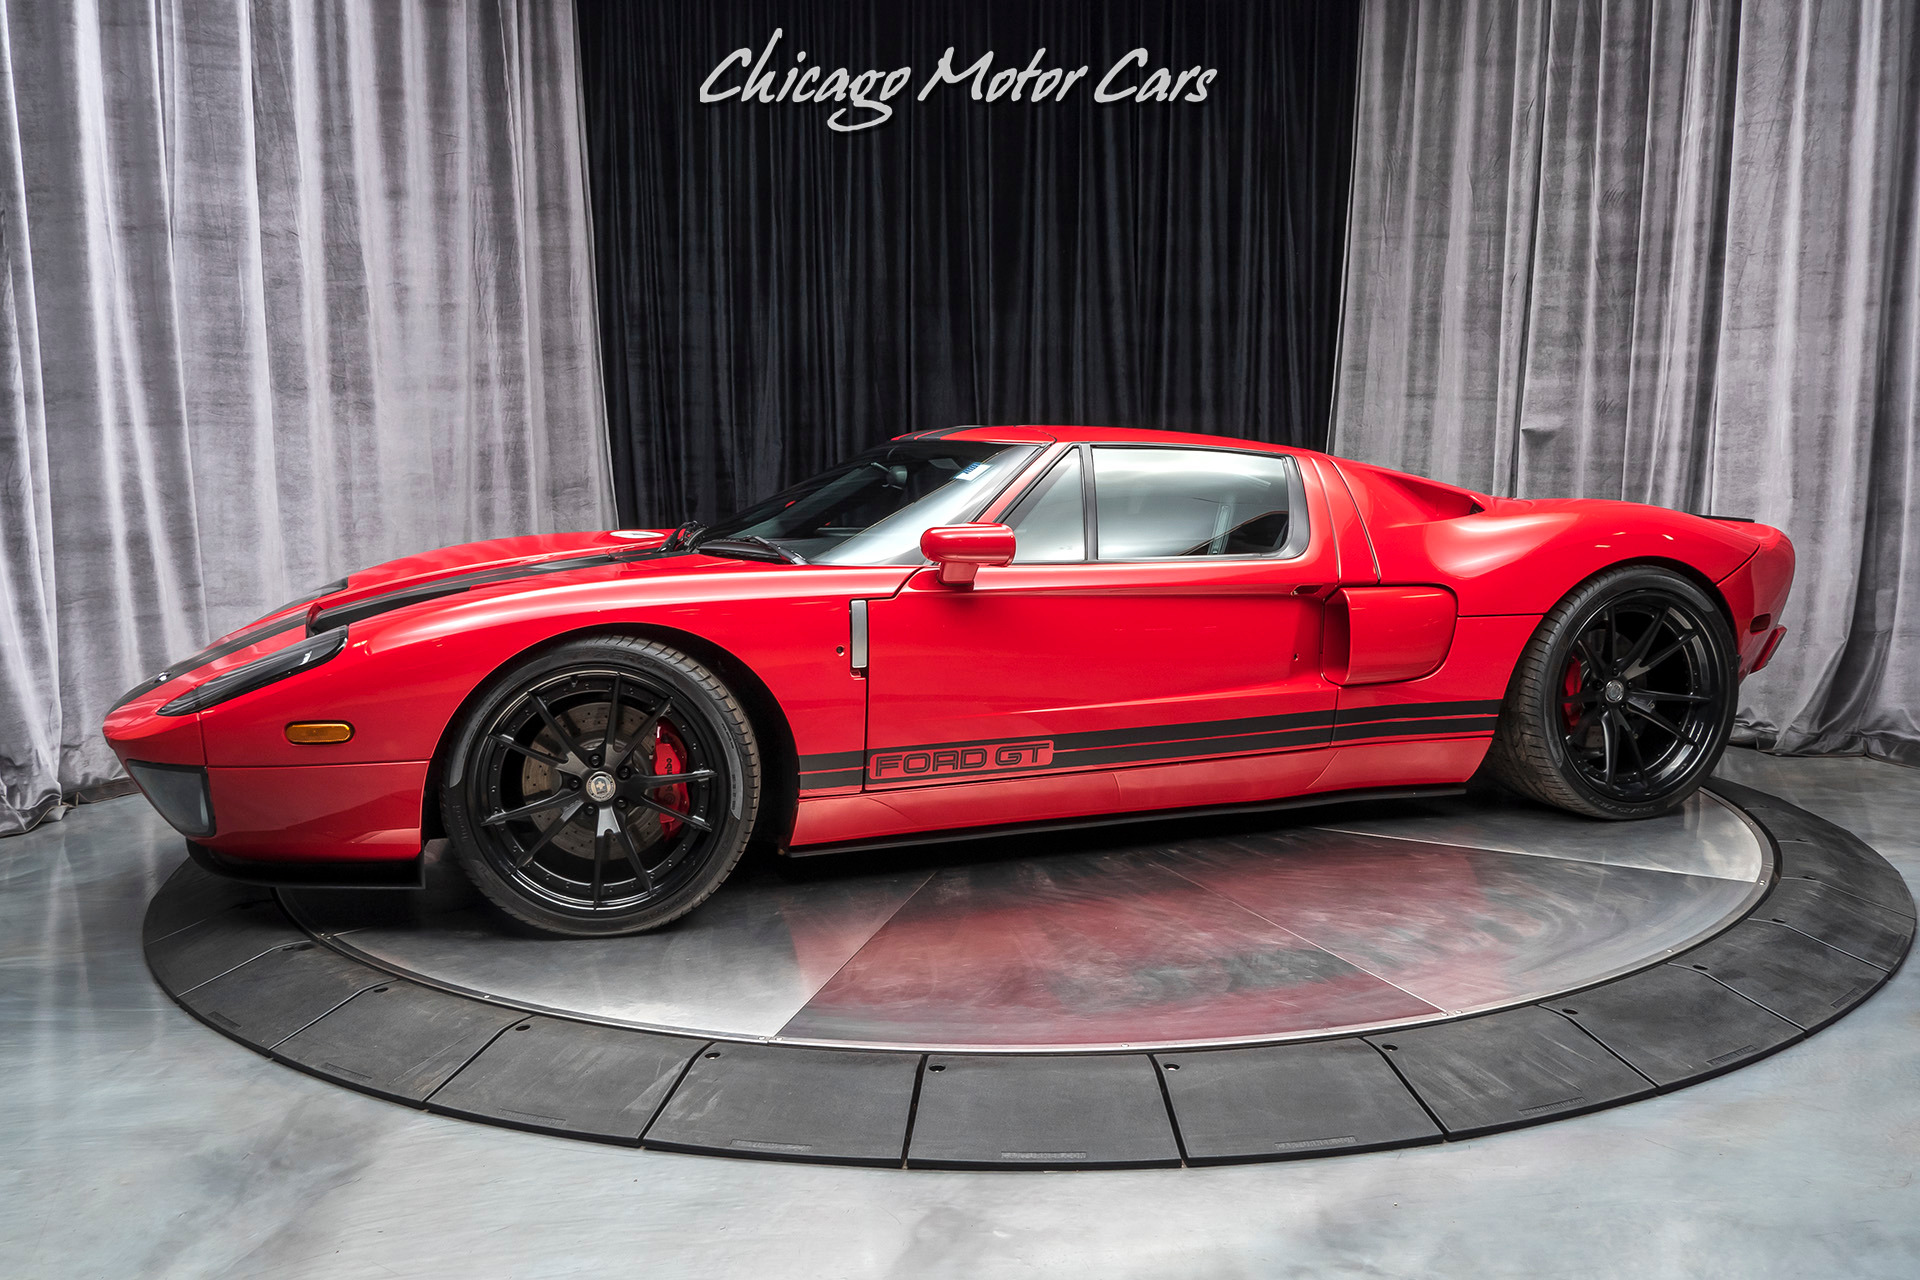 Used-2006-Ford-GT-GT40-All-4-Options-Upgrades-HRE-Wheels-Whipple-Supercharger